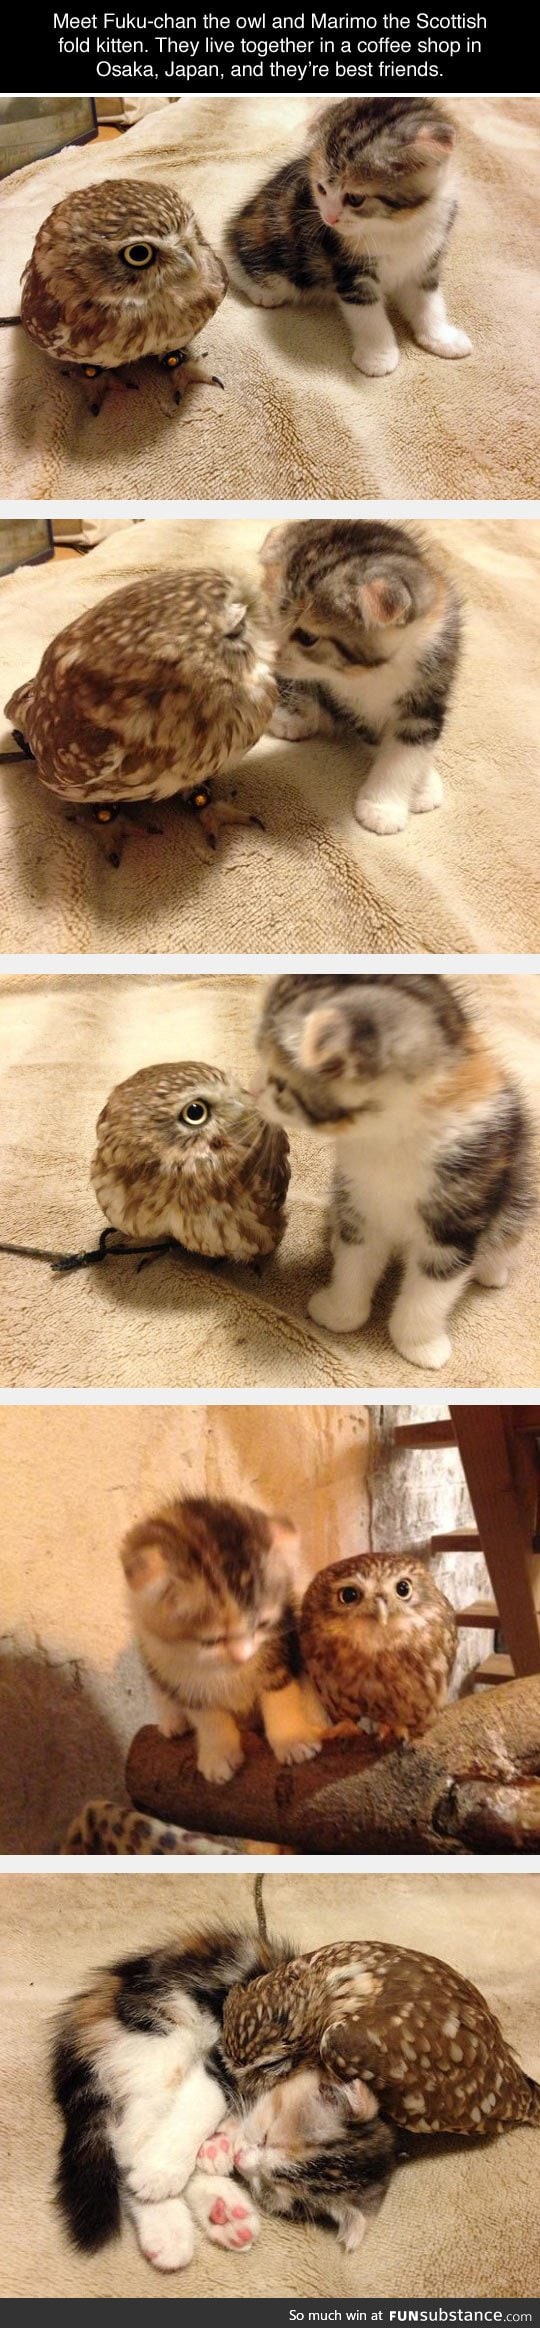 Owl and cat buddies for life